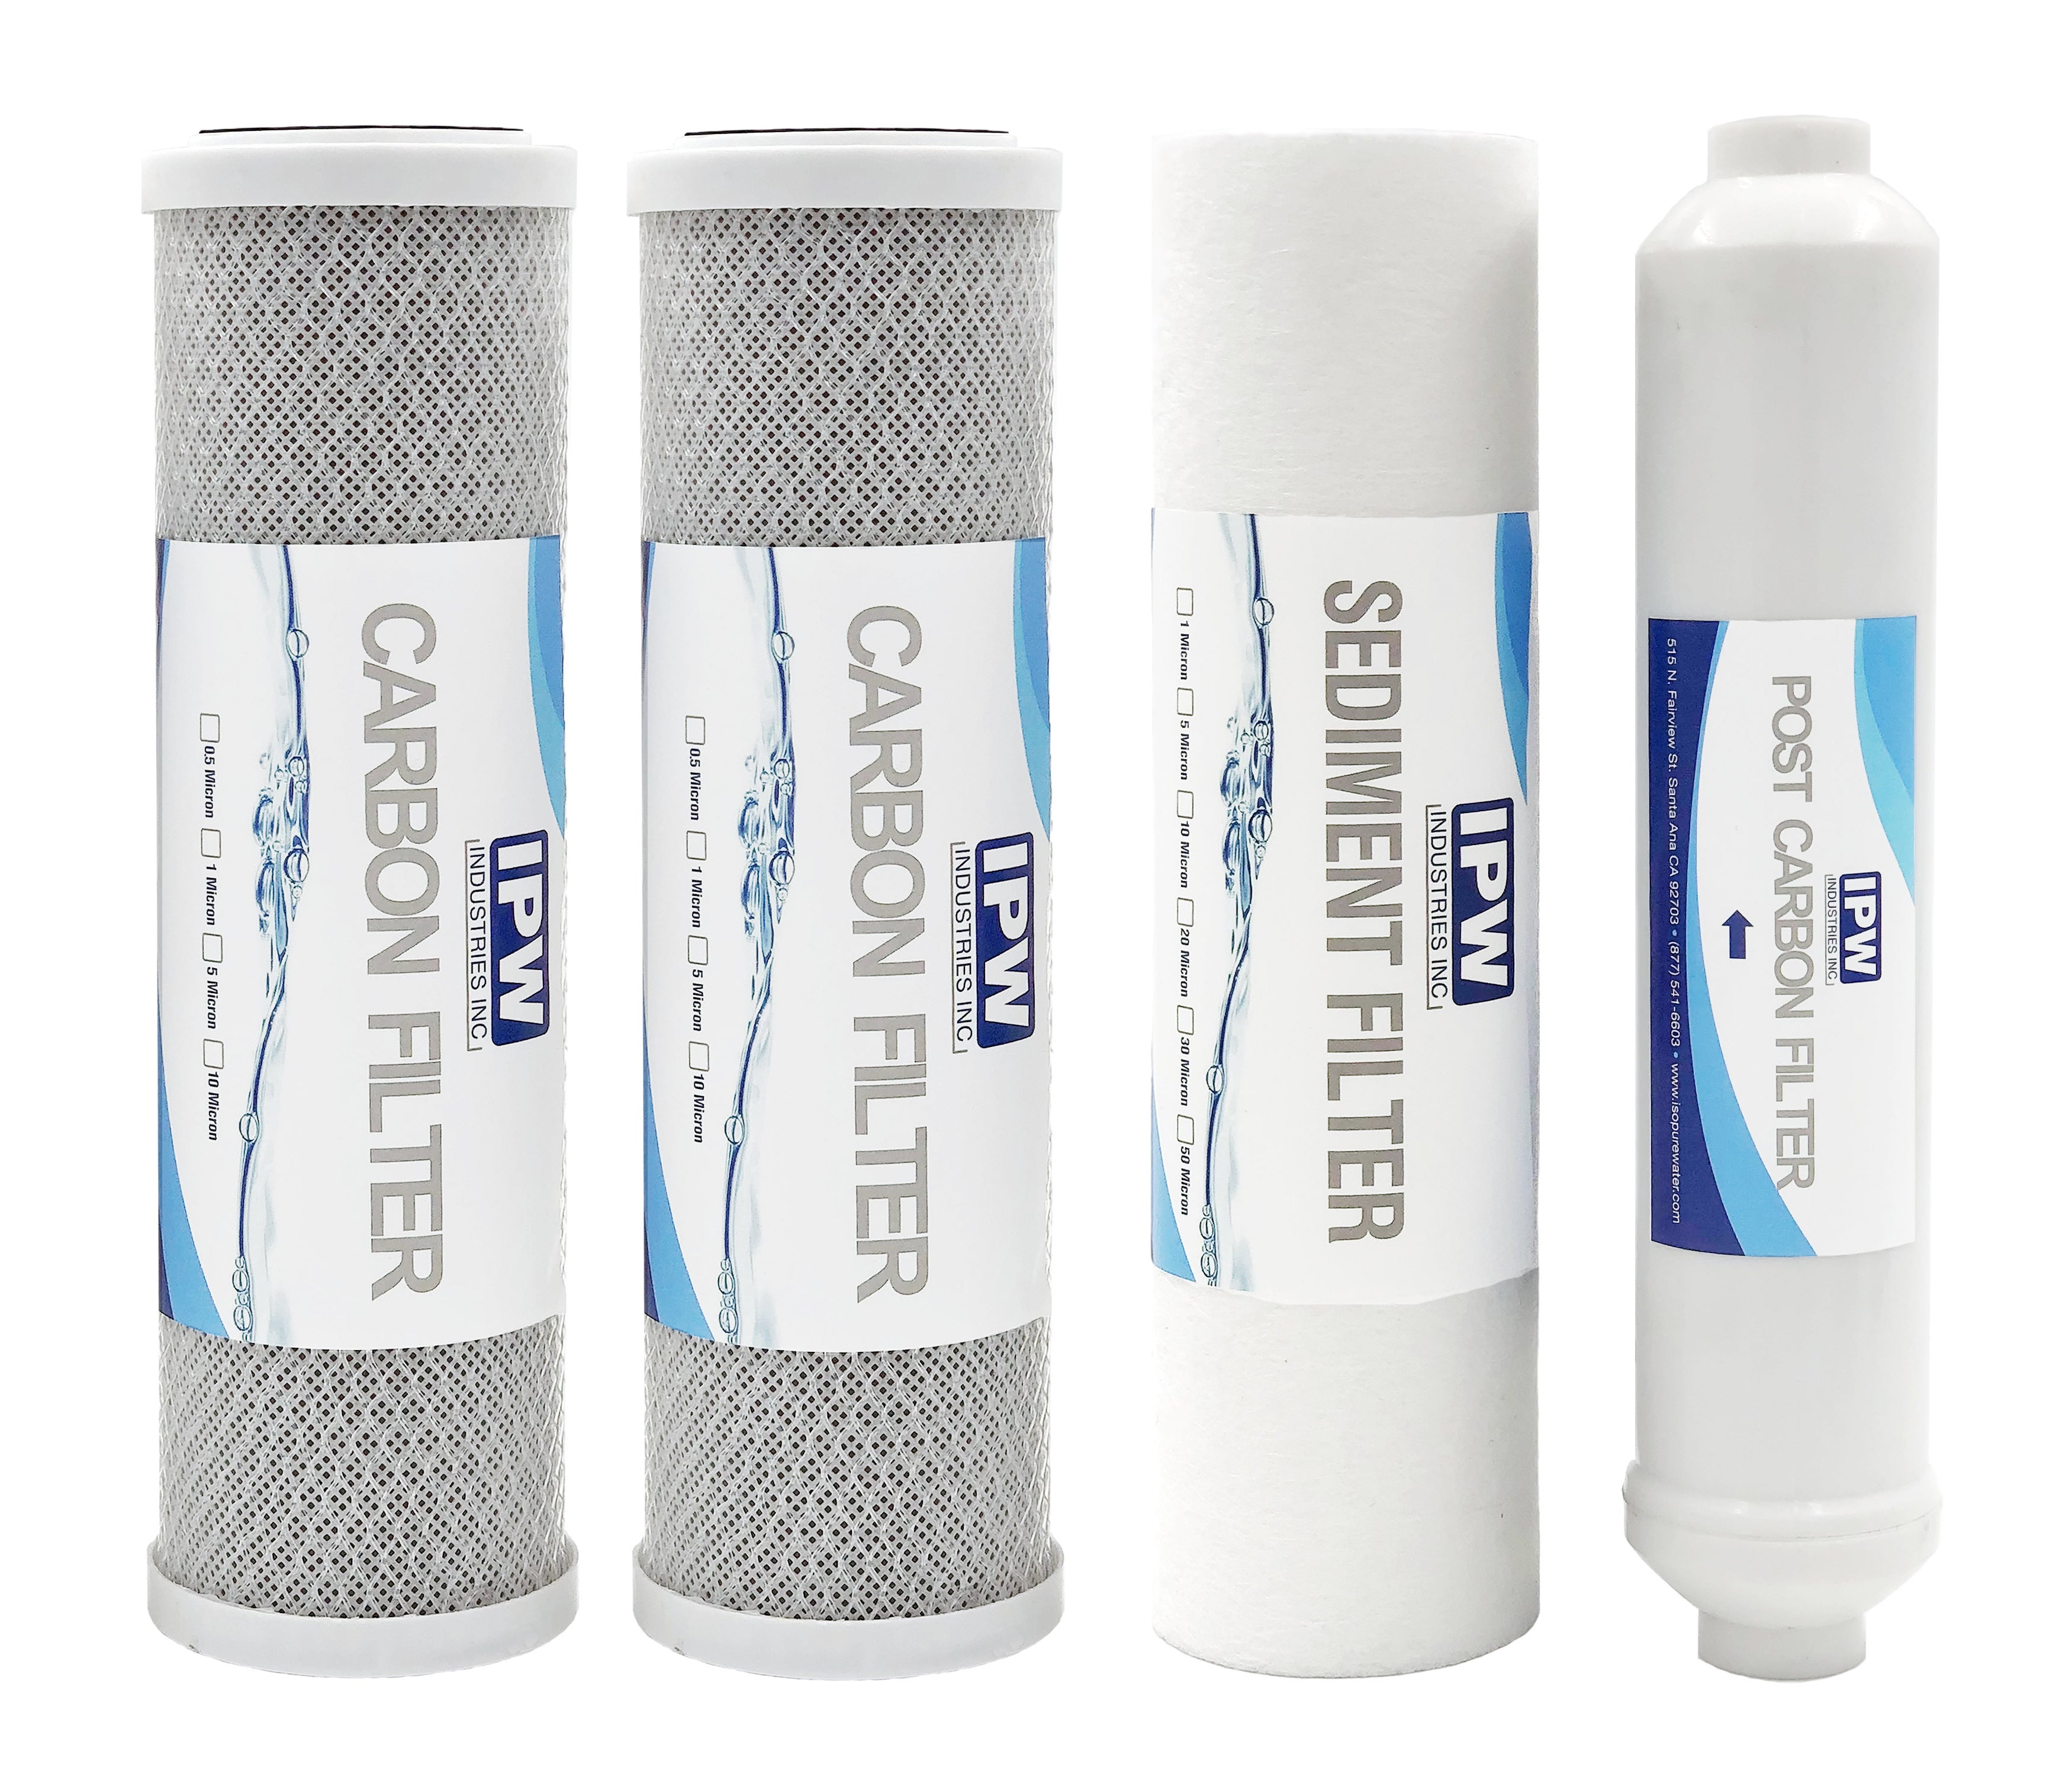 Compatible With Replacement Filter Kit For Watts Ro-tfm-5sv Ro System - Includes Carbon Block Filters, Pp Sediment Filter & Inline Filter Cartridge By Ipw Industries Inc